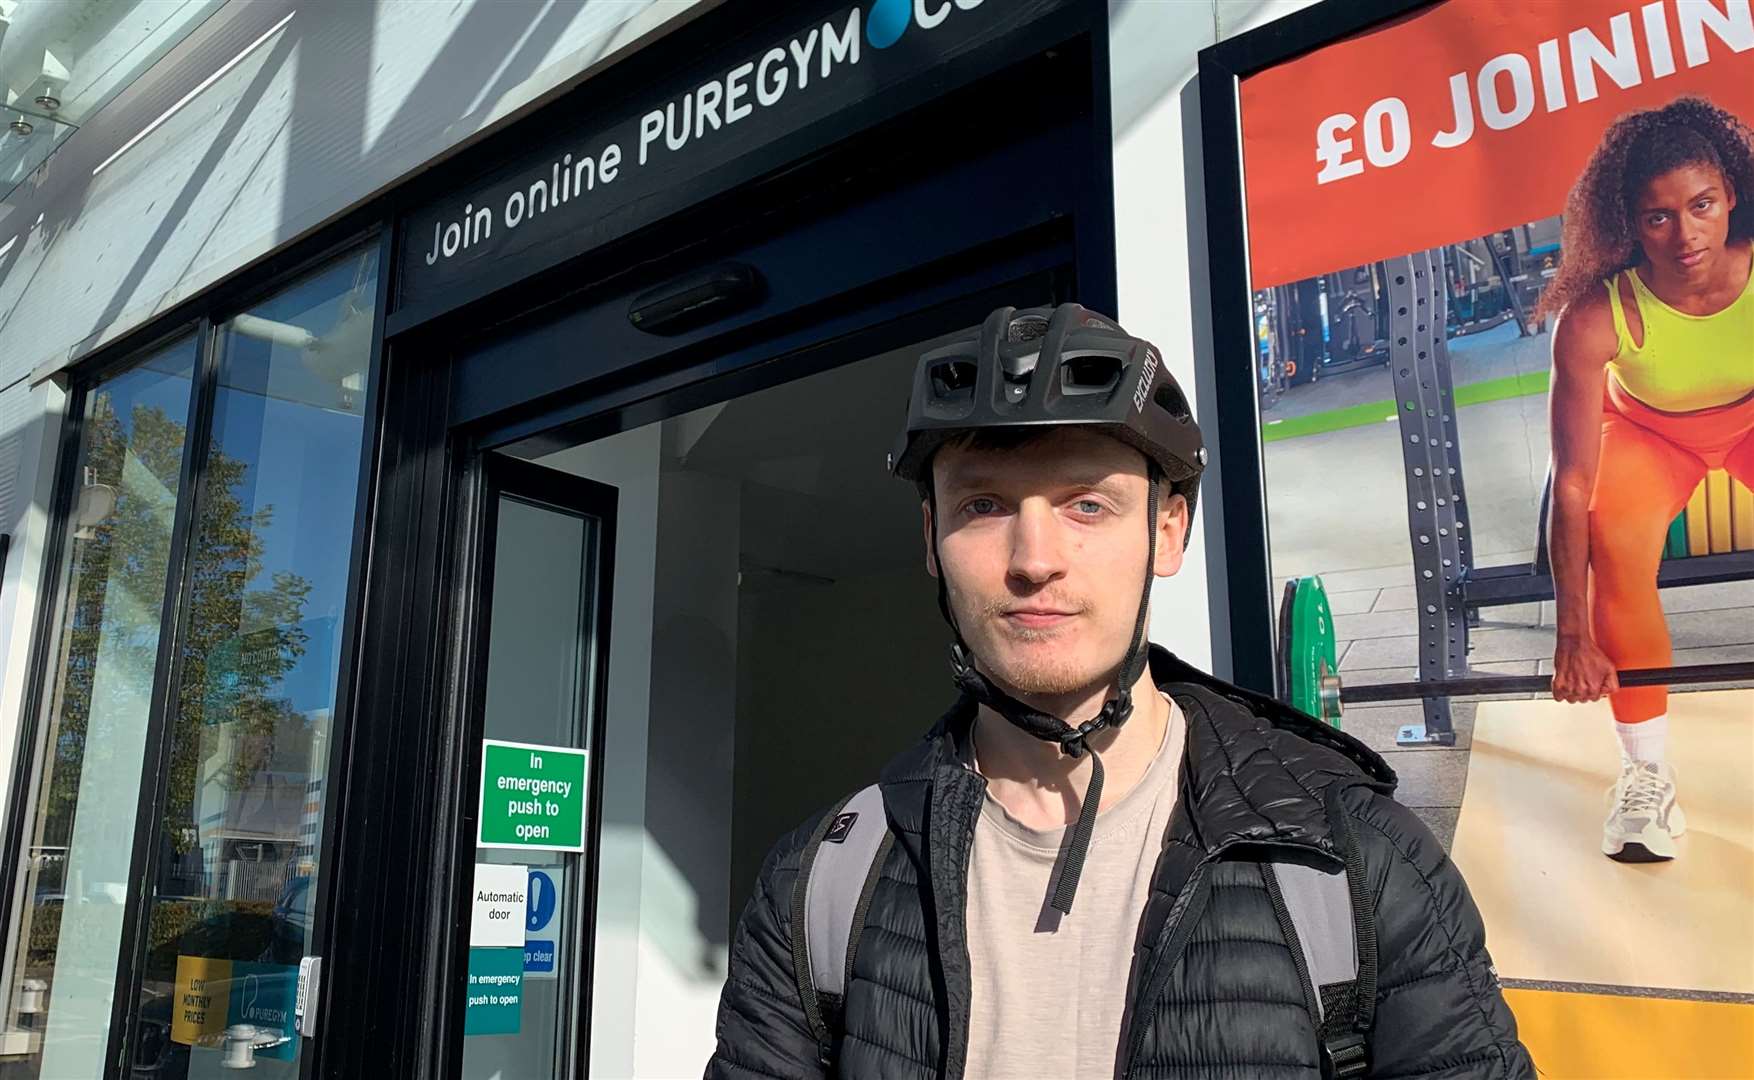 PureGym Canterbury member Kieran Morgan thinks consent should always be sought from those nearby